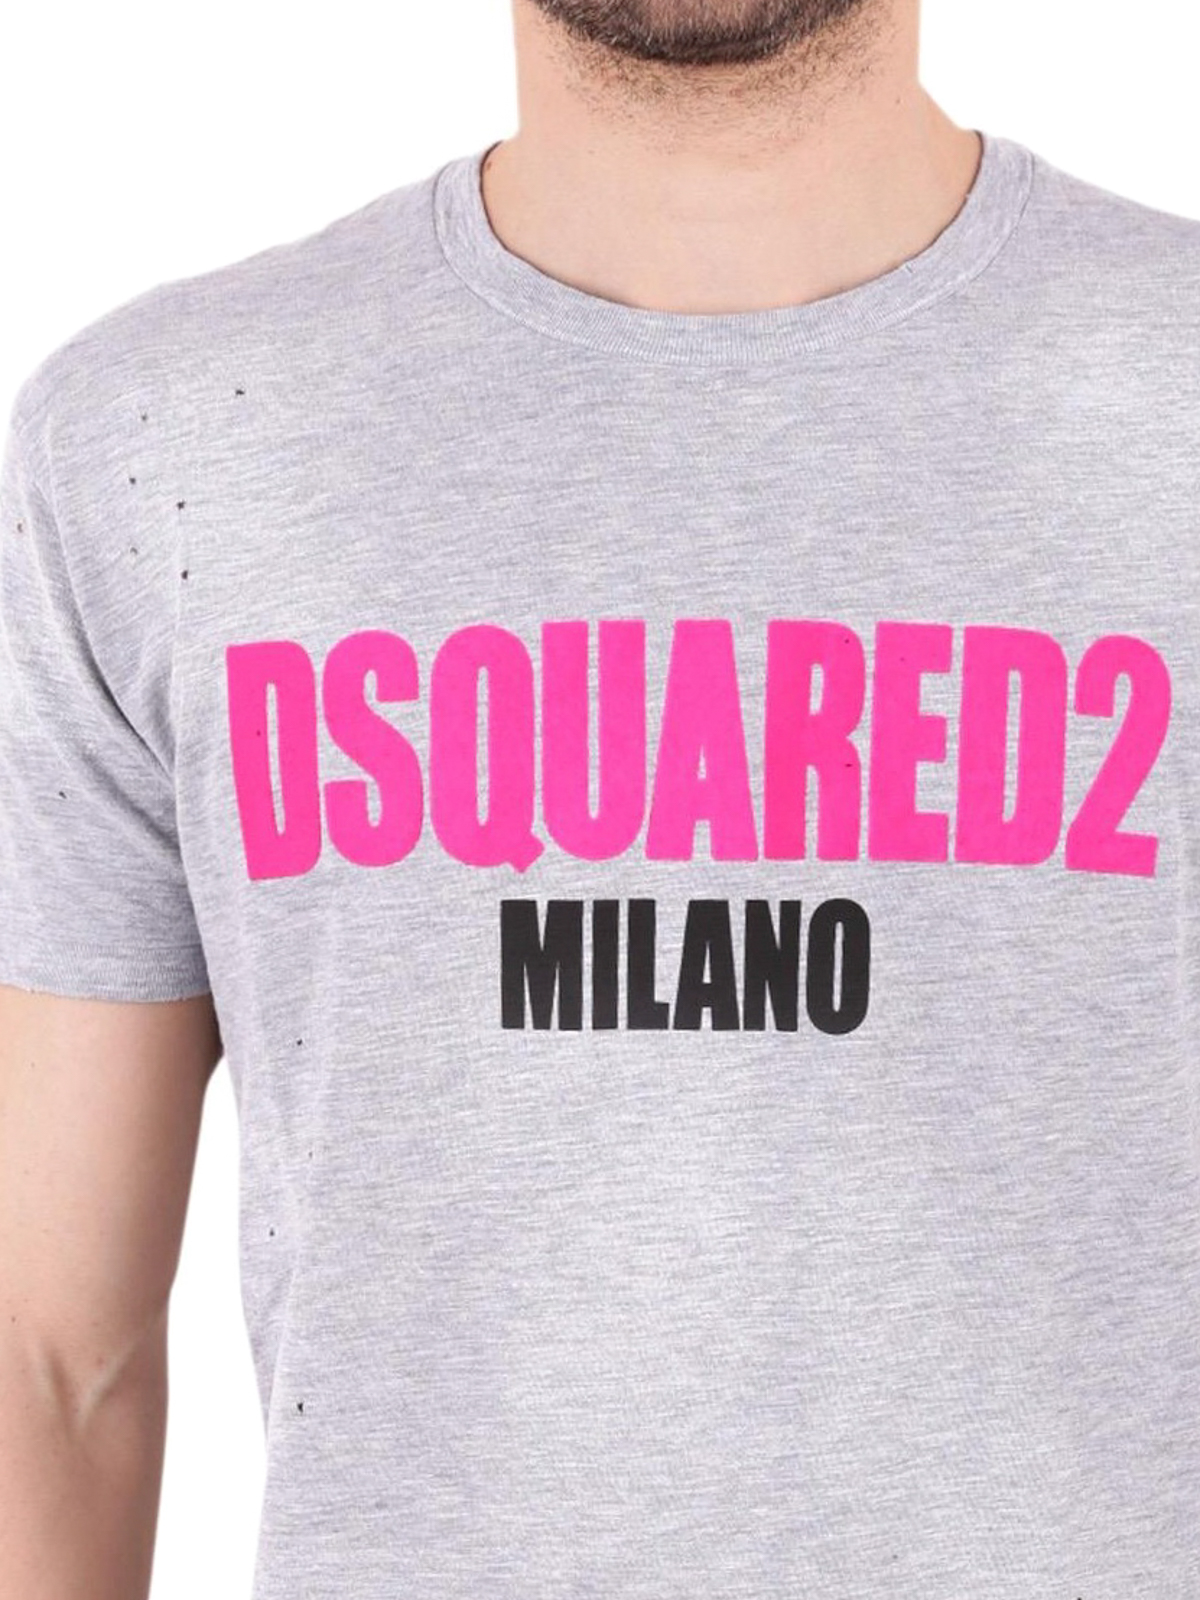 tee shirt dsquared gris